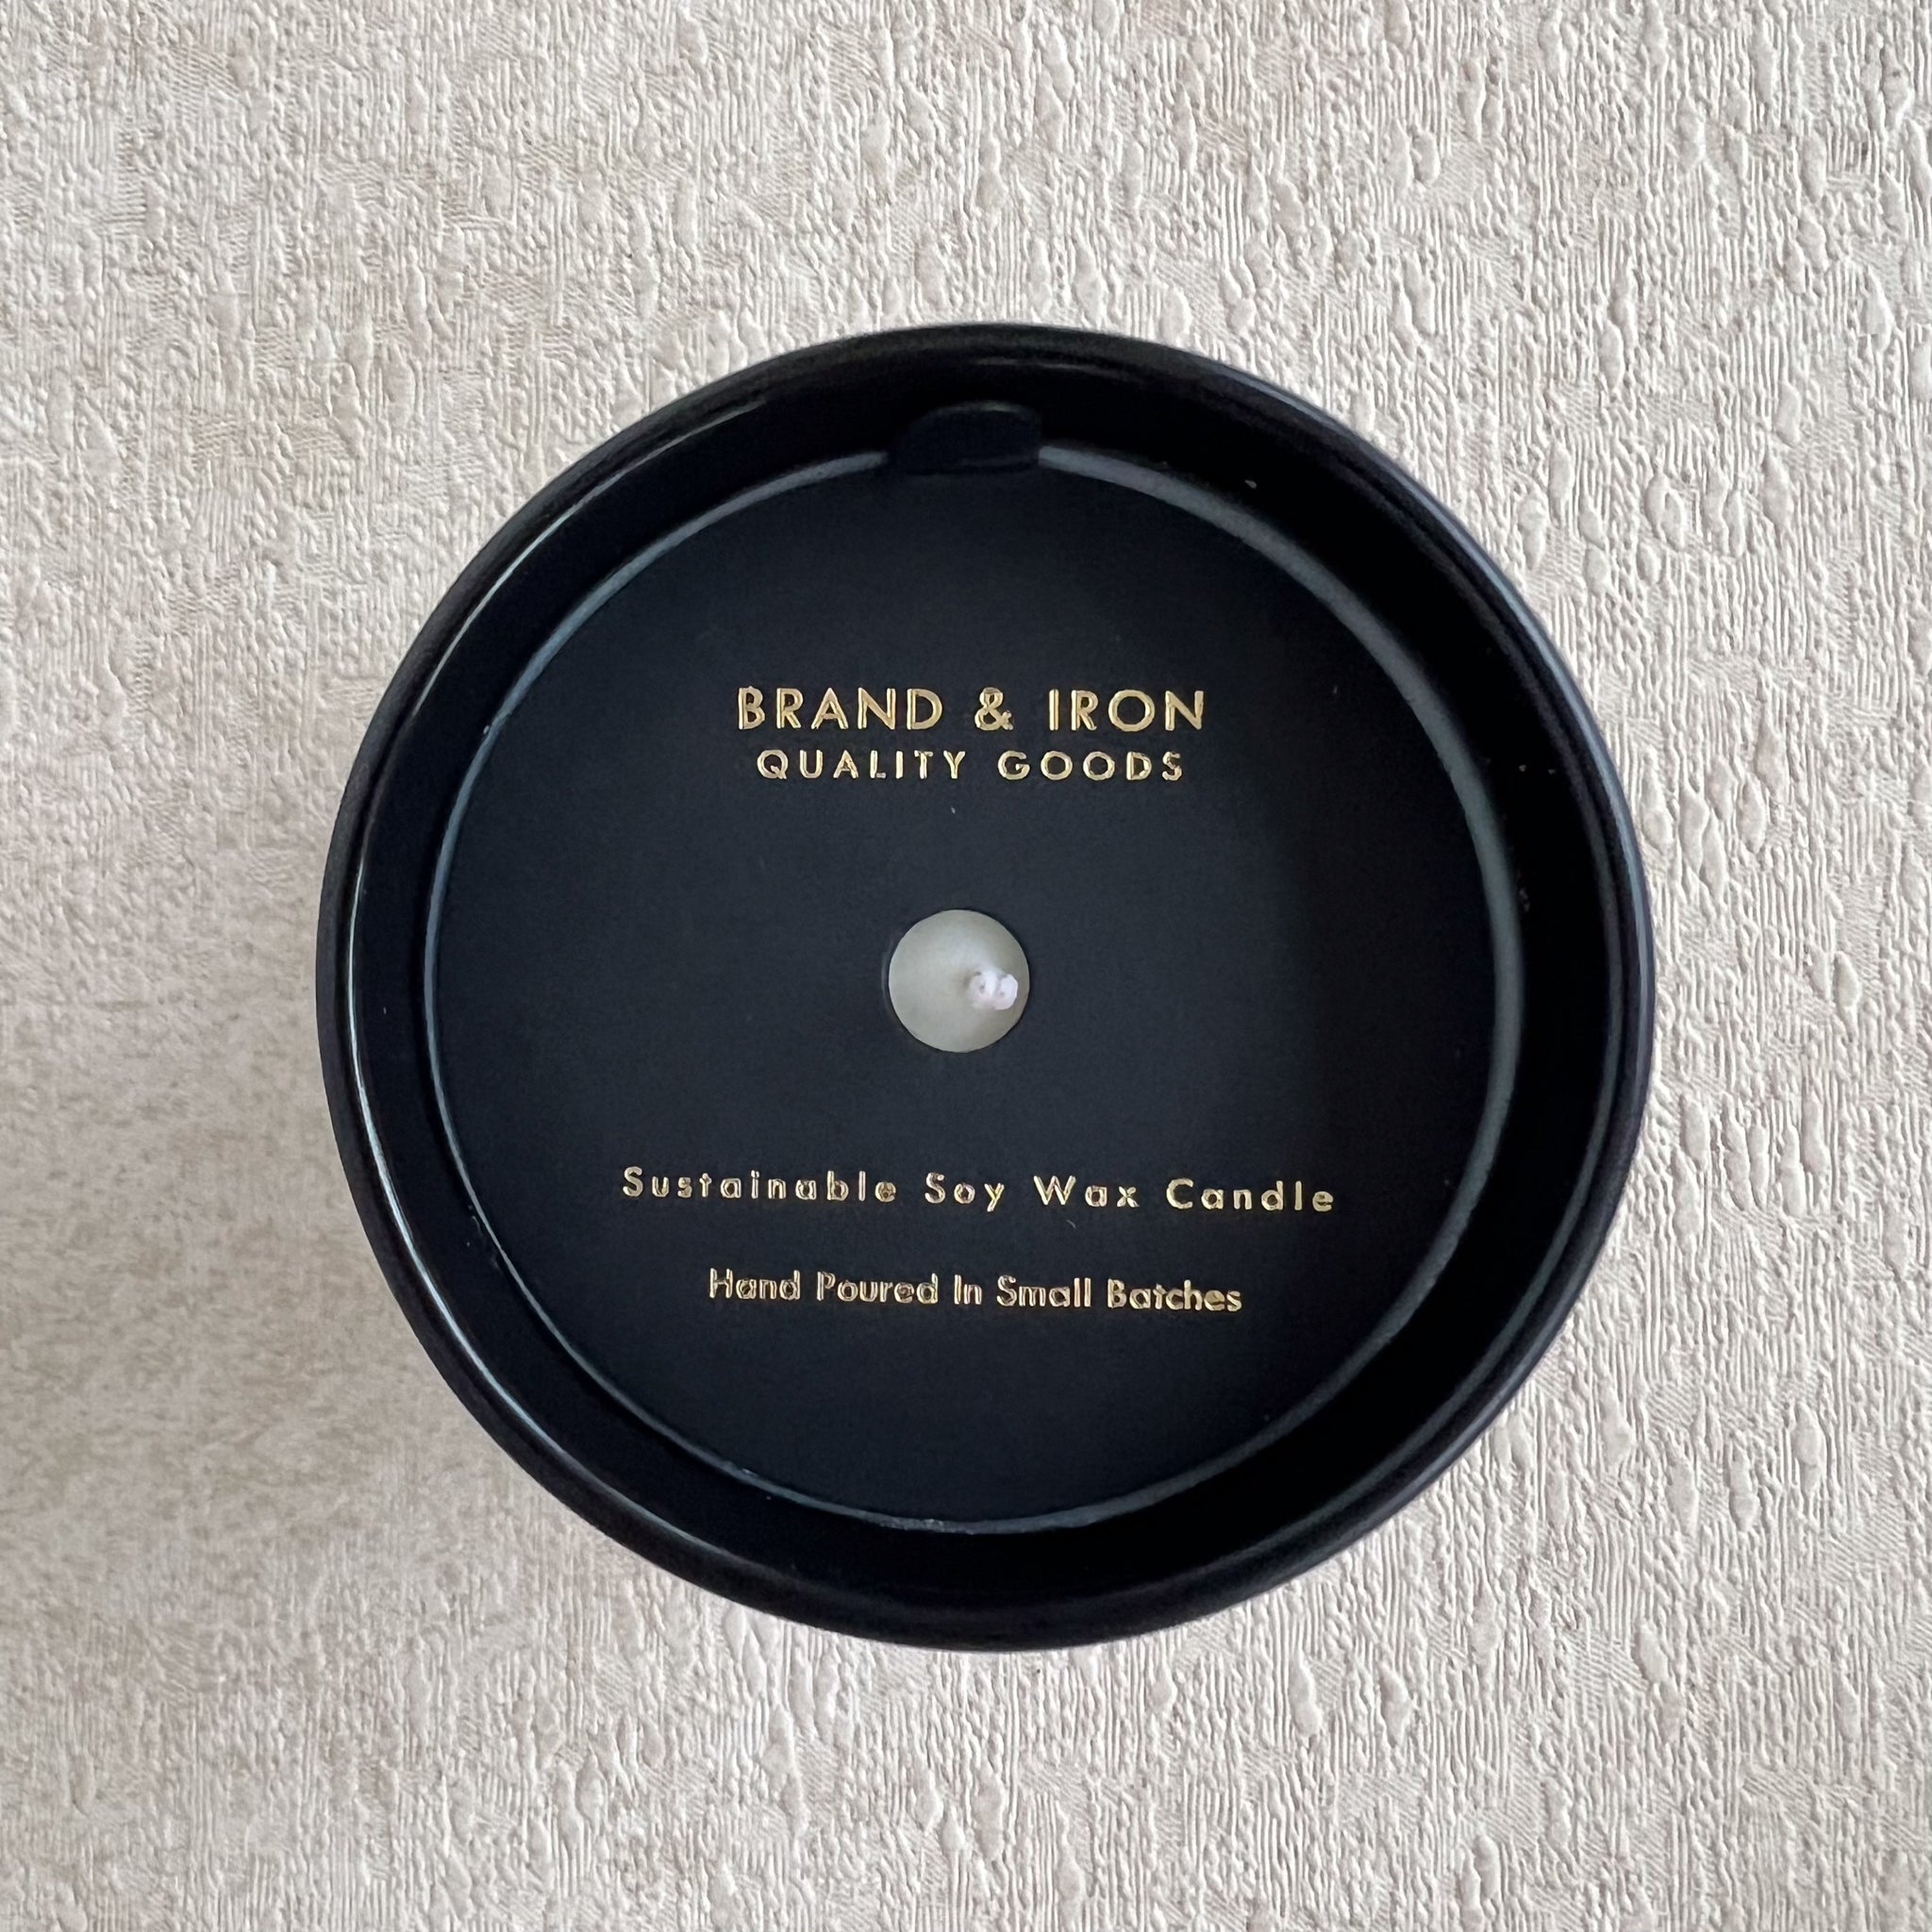 Brand &amp; Iron Soy Candle: Spruce + Amber